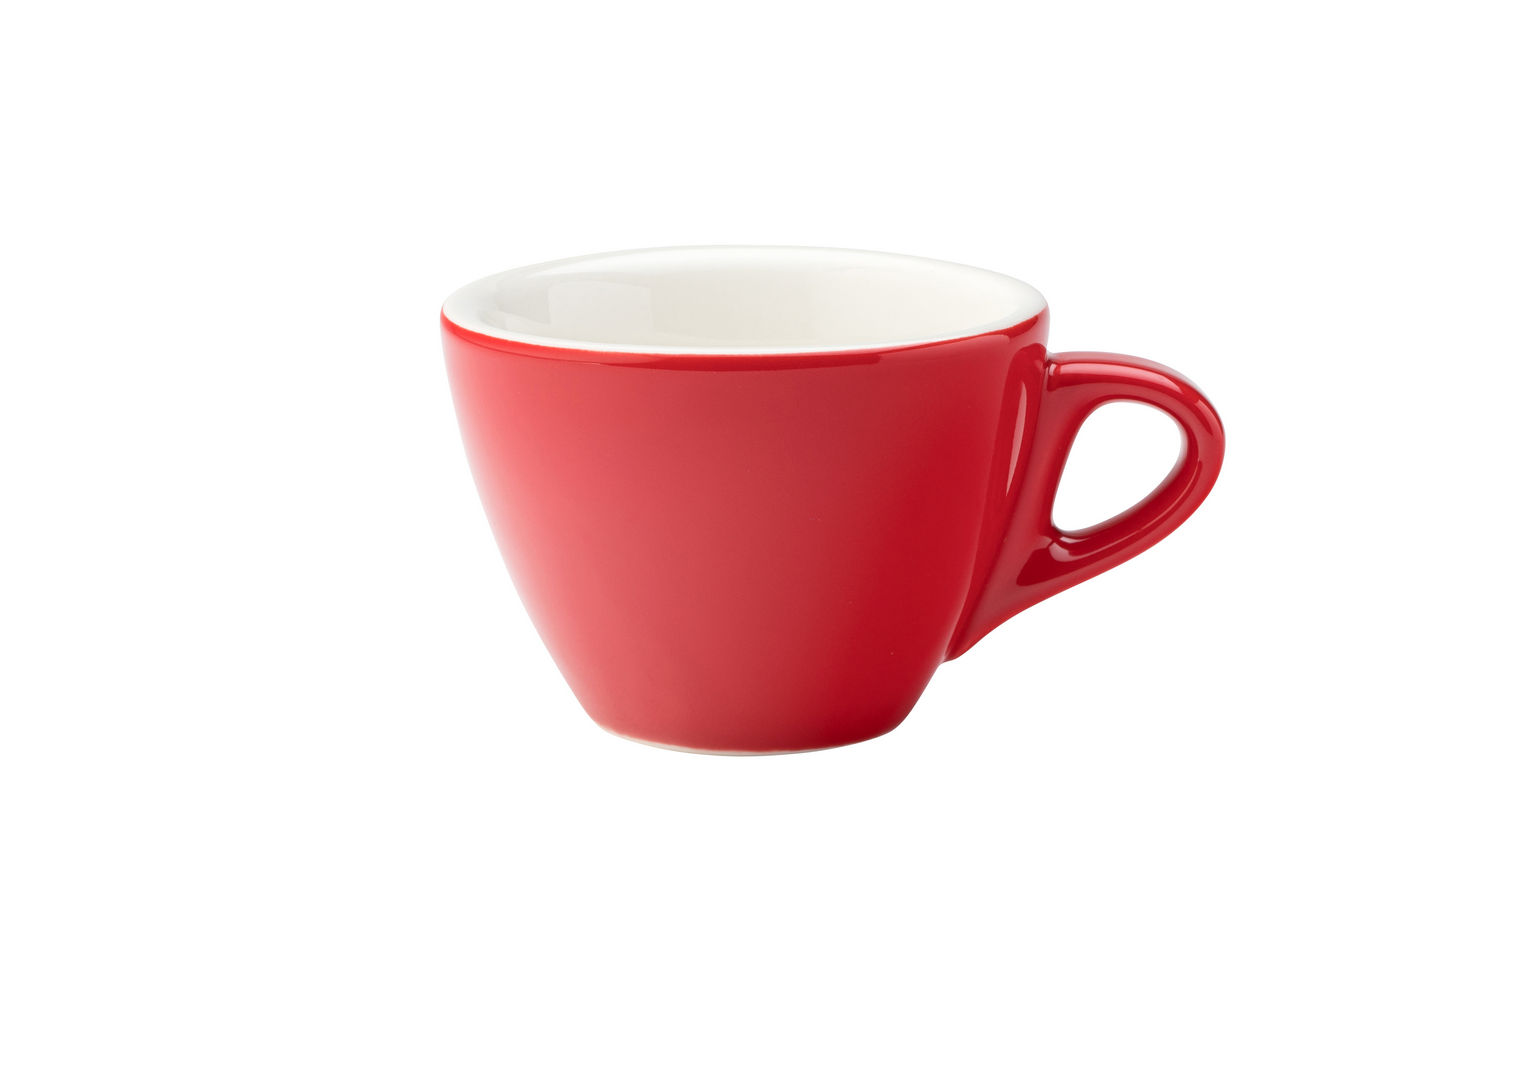 Barista Flat White Red Cup 5.5oz (16cl) - CT8138-000000-B01012 (Pack of 12)